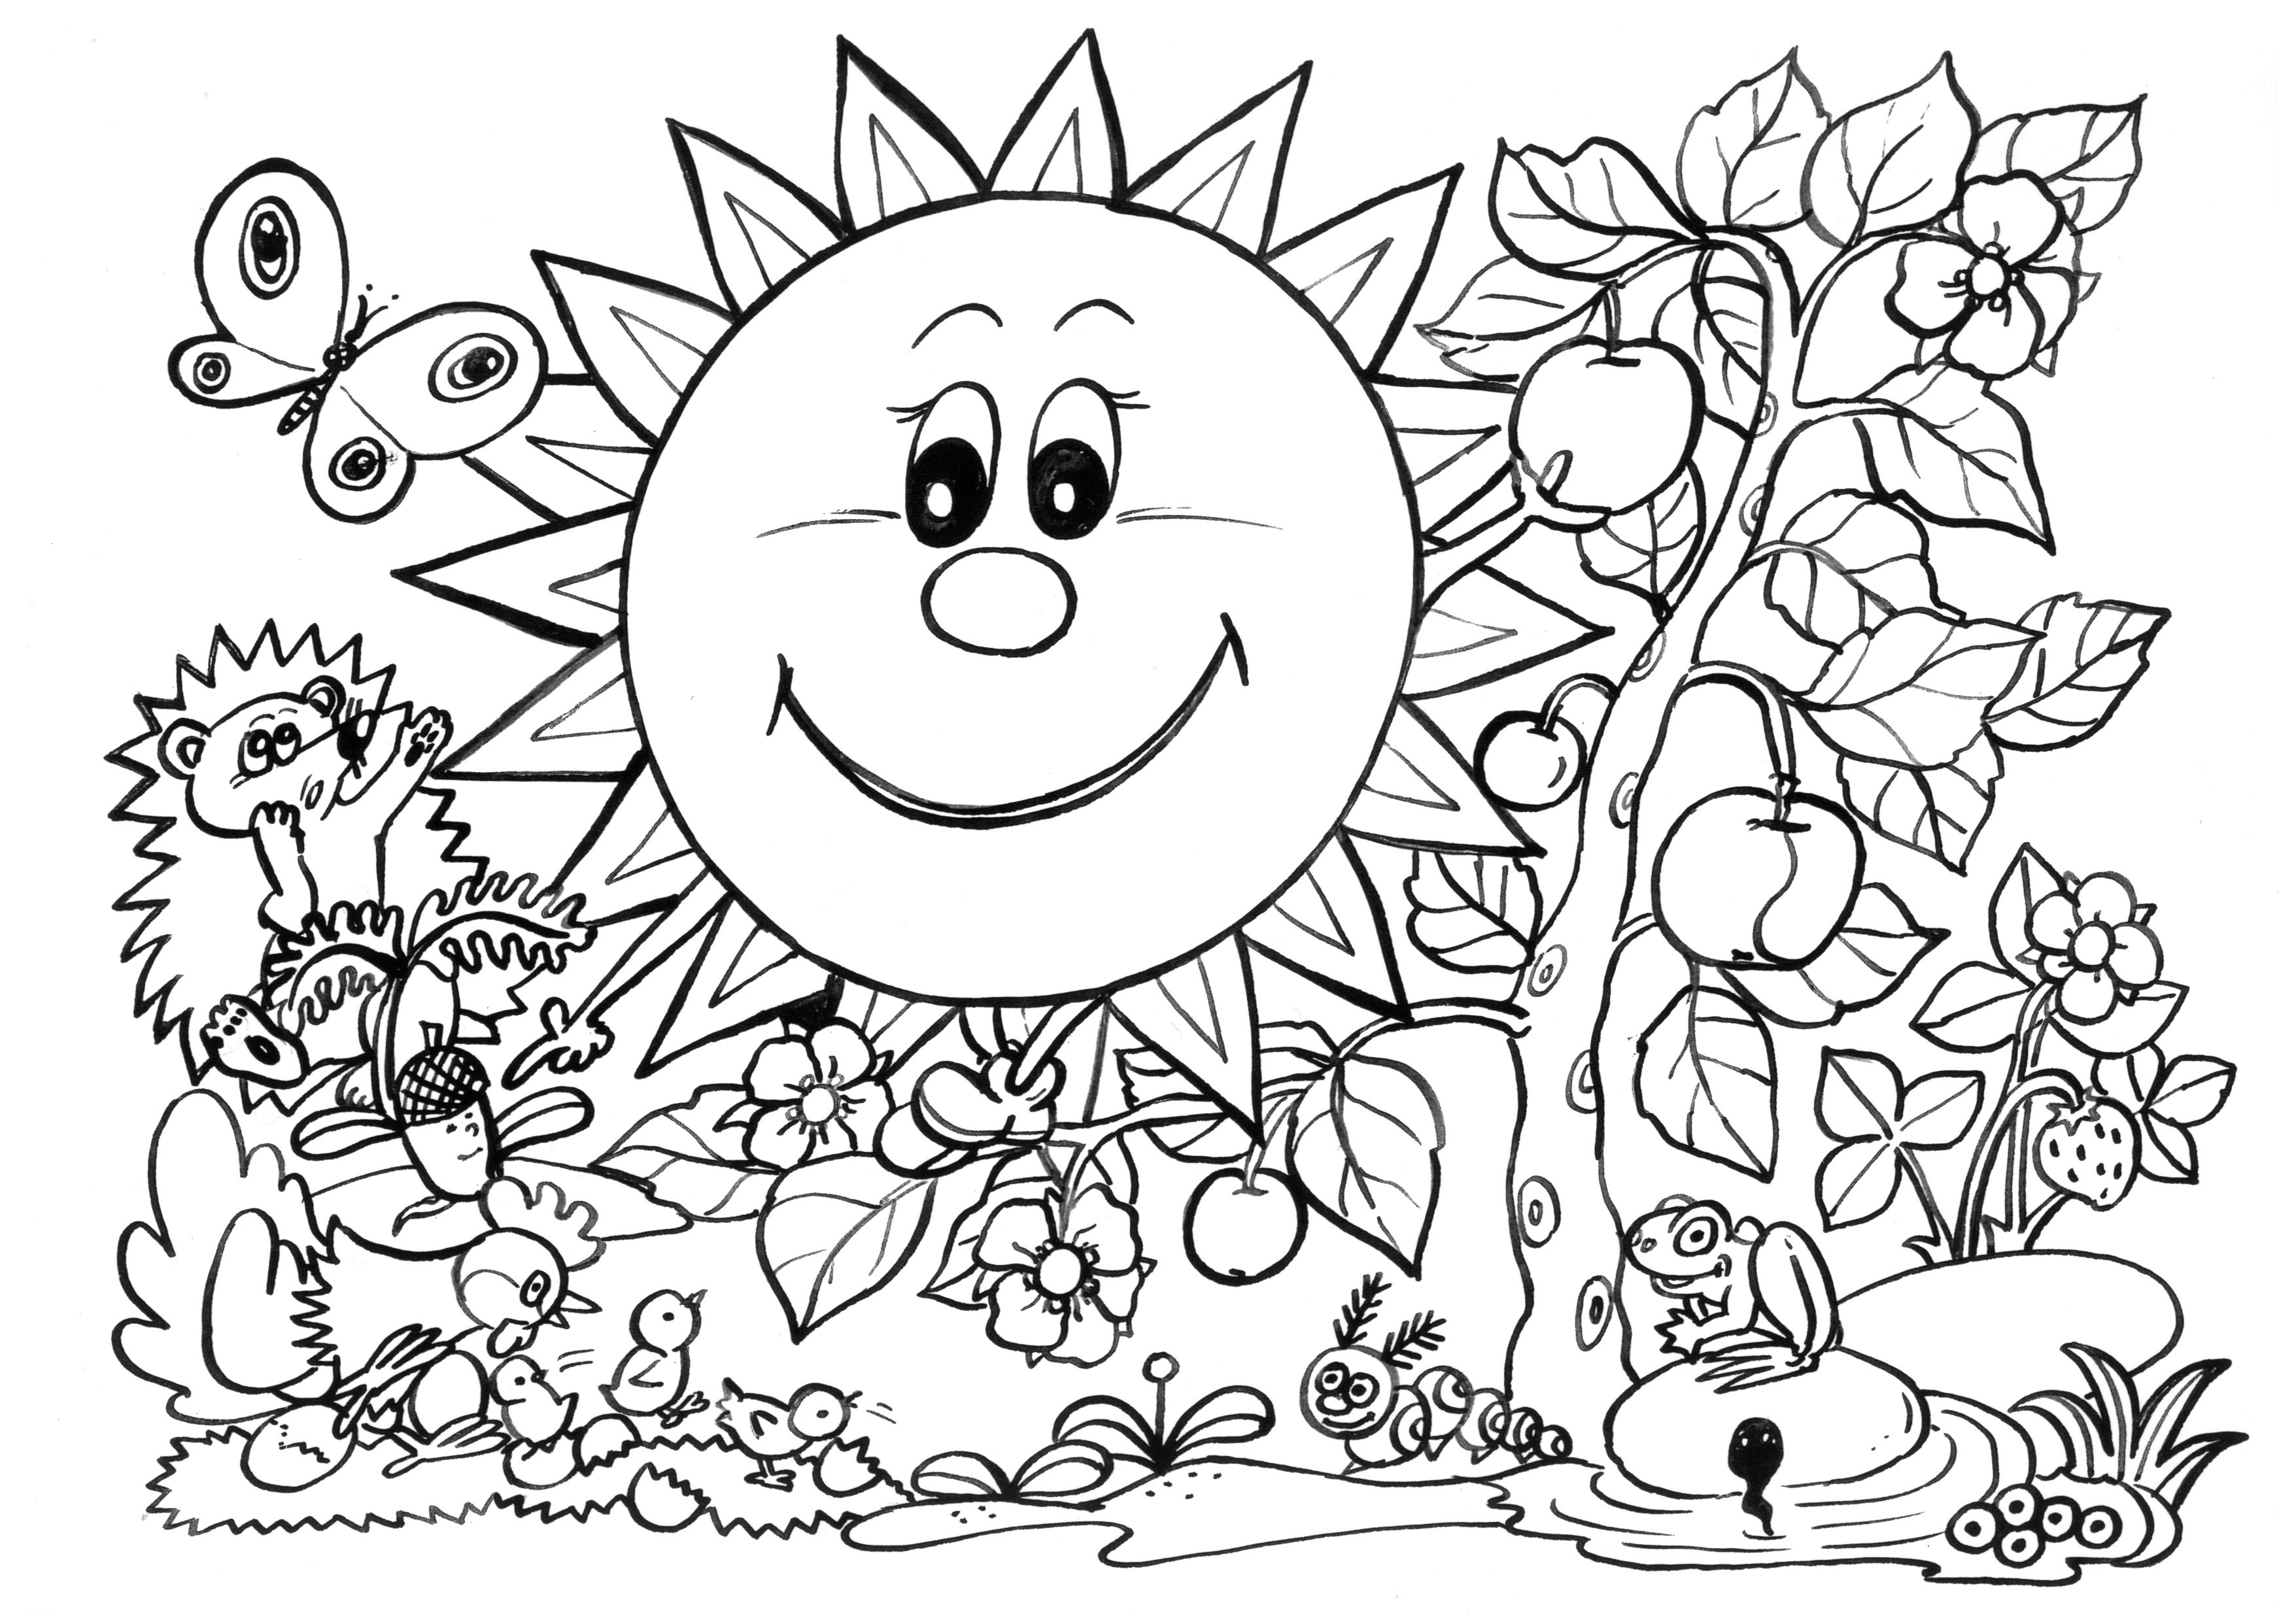 Large Coloring Pages To Print At GetDrawings Free Download